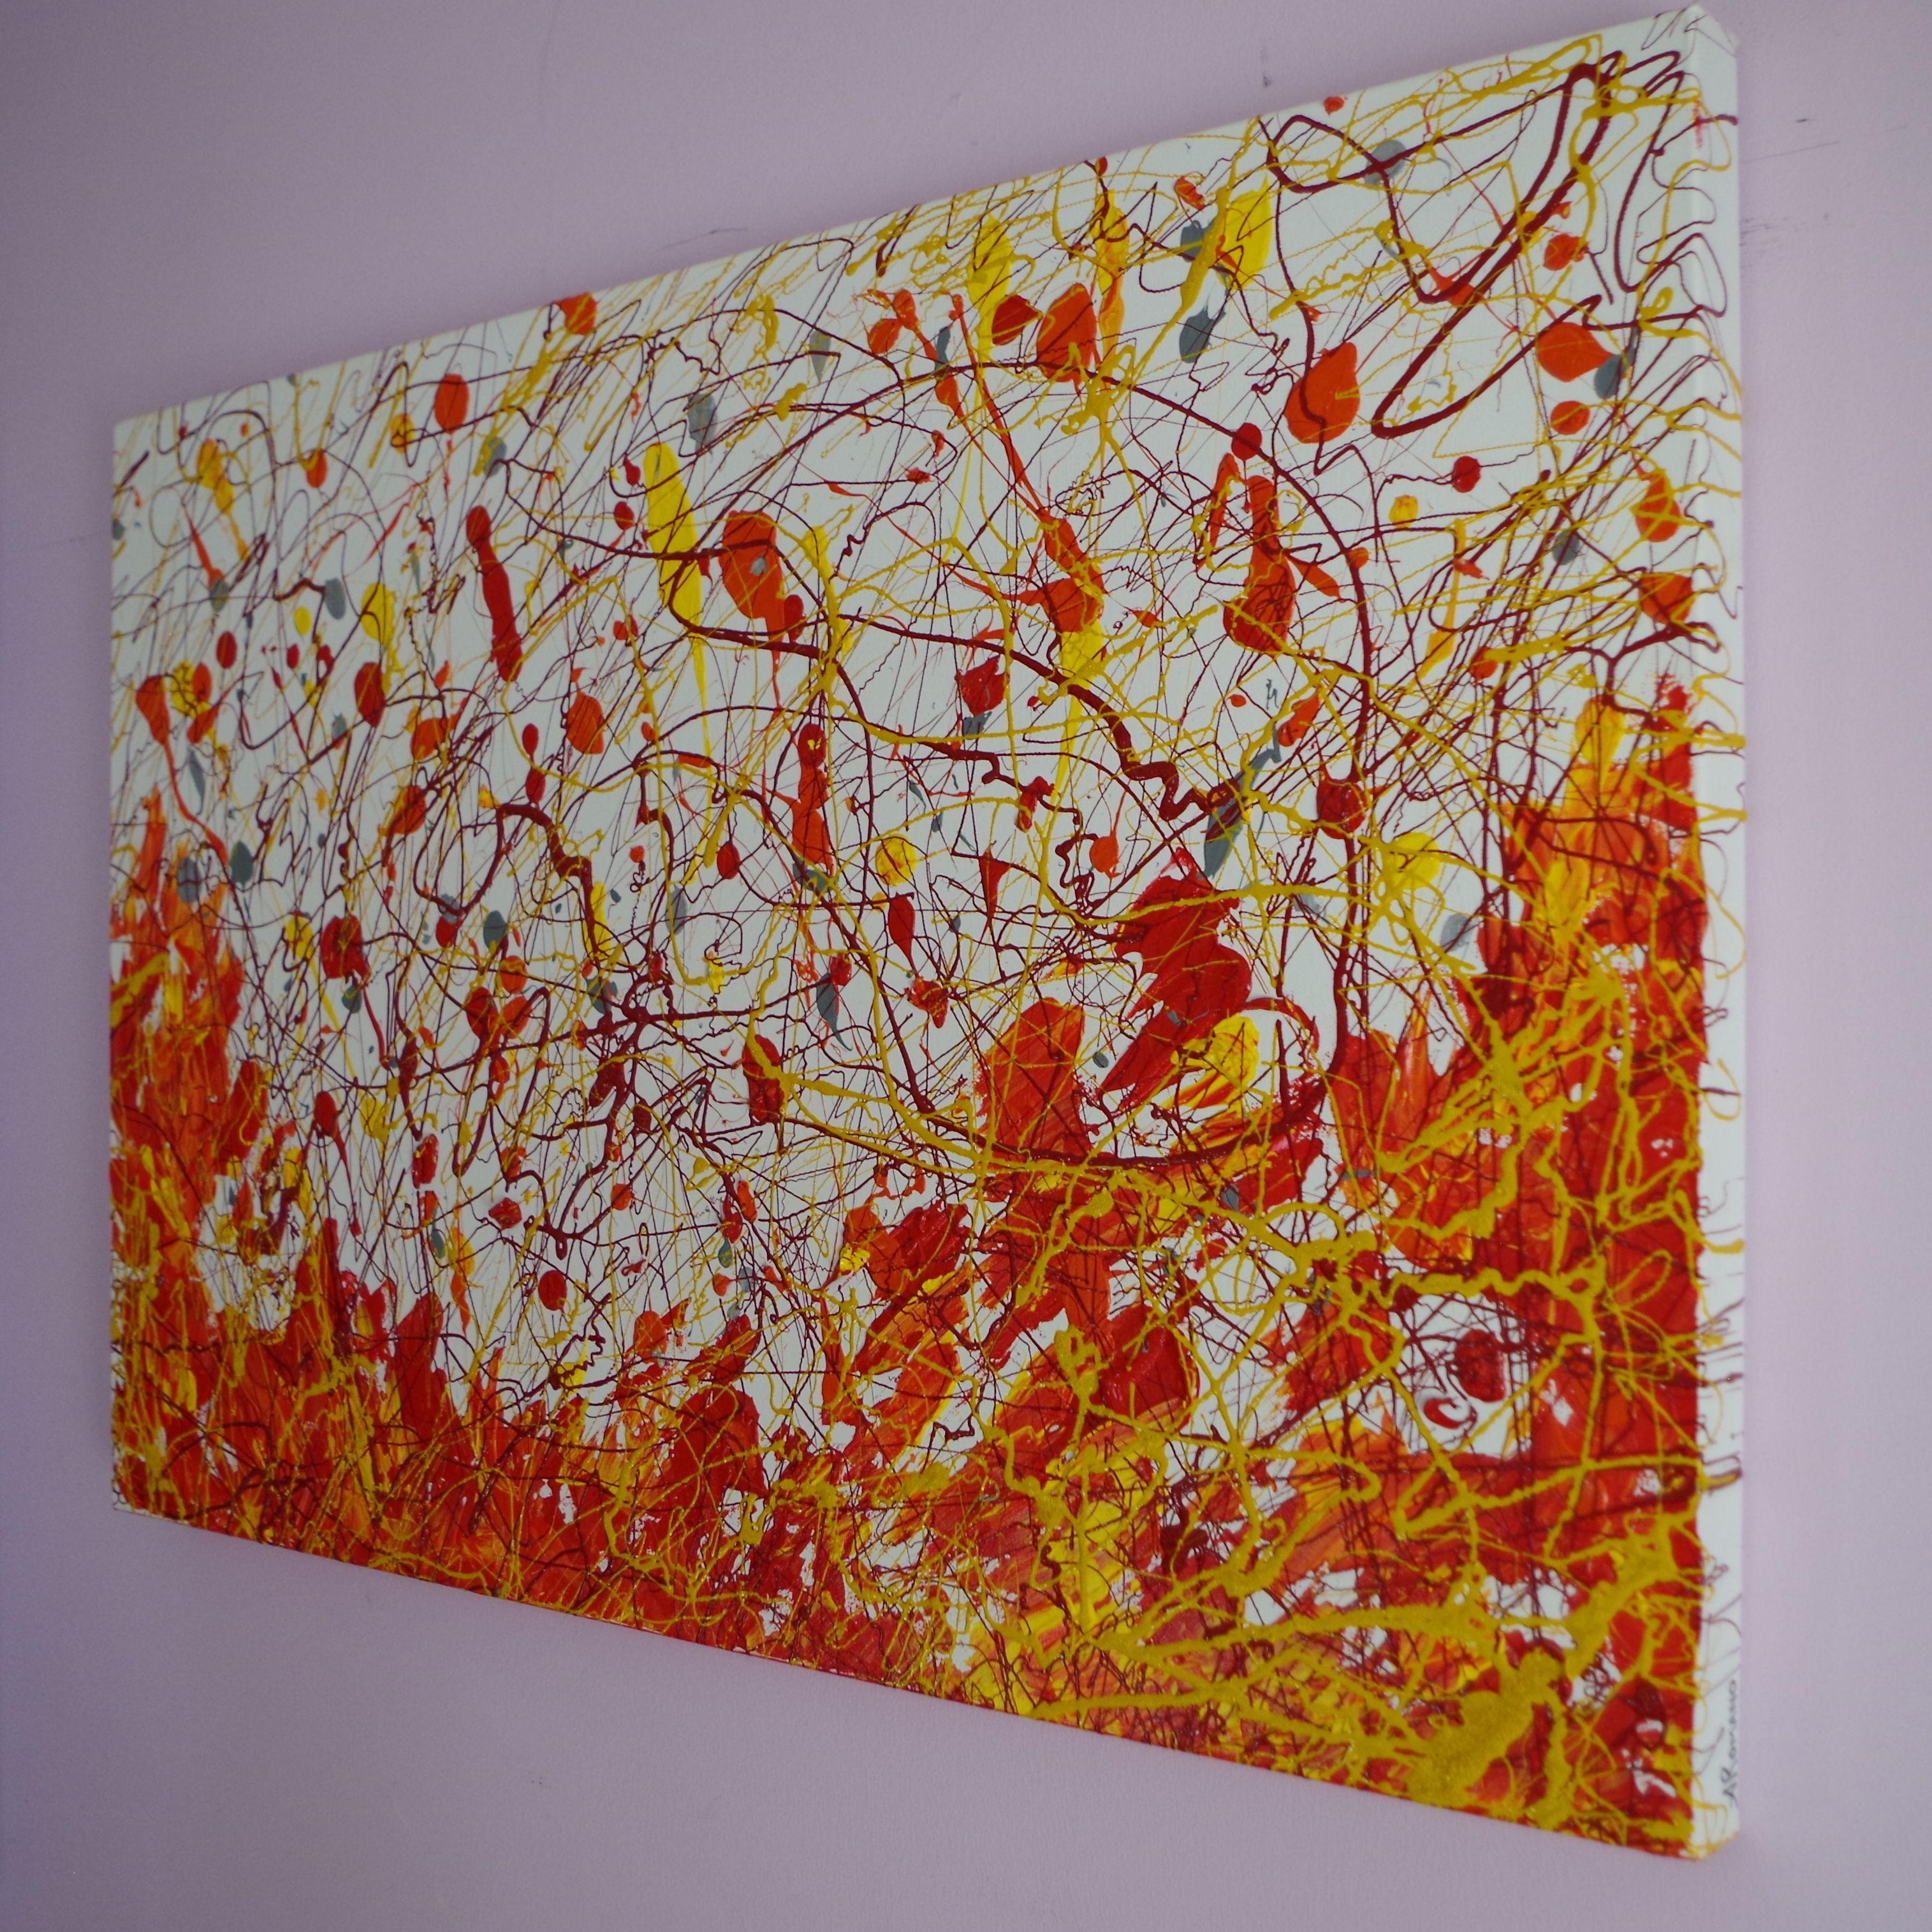 Fire Dance is a bold, original, abstract expressionism painting with dripped inks expressively splashed all over the negative white space in the background and overtop the textured, vibrant oil paints done in impasto style with palette knives.  The